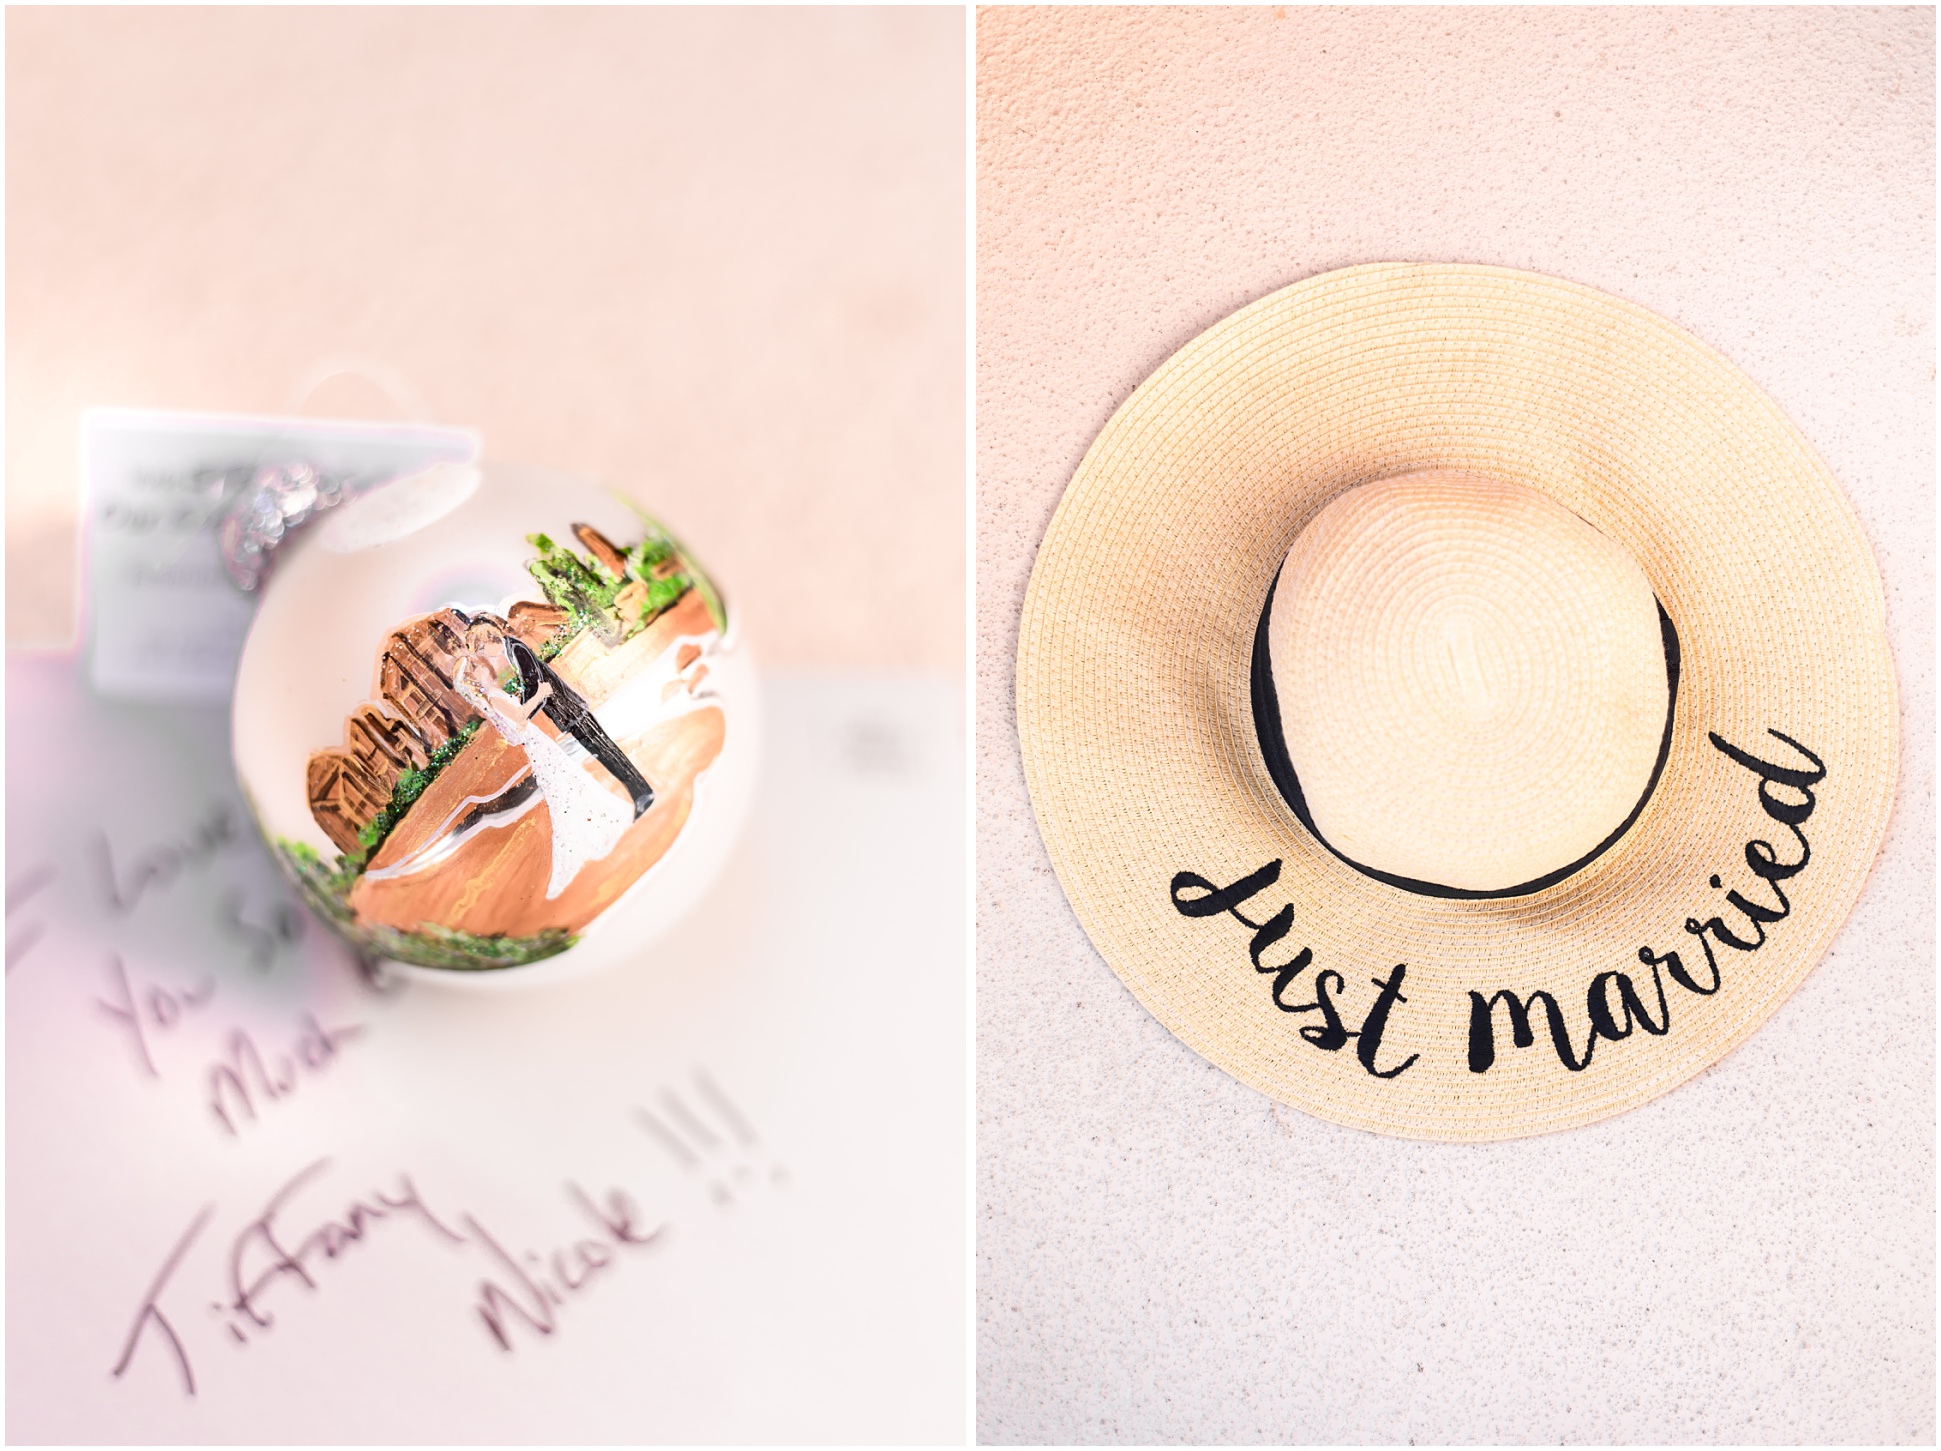 Left Image: Christmas bulb of bride and groom kising in front of red rocks, right image, Just Married Sun Hat